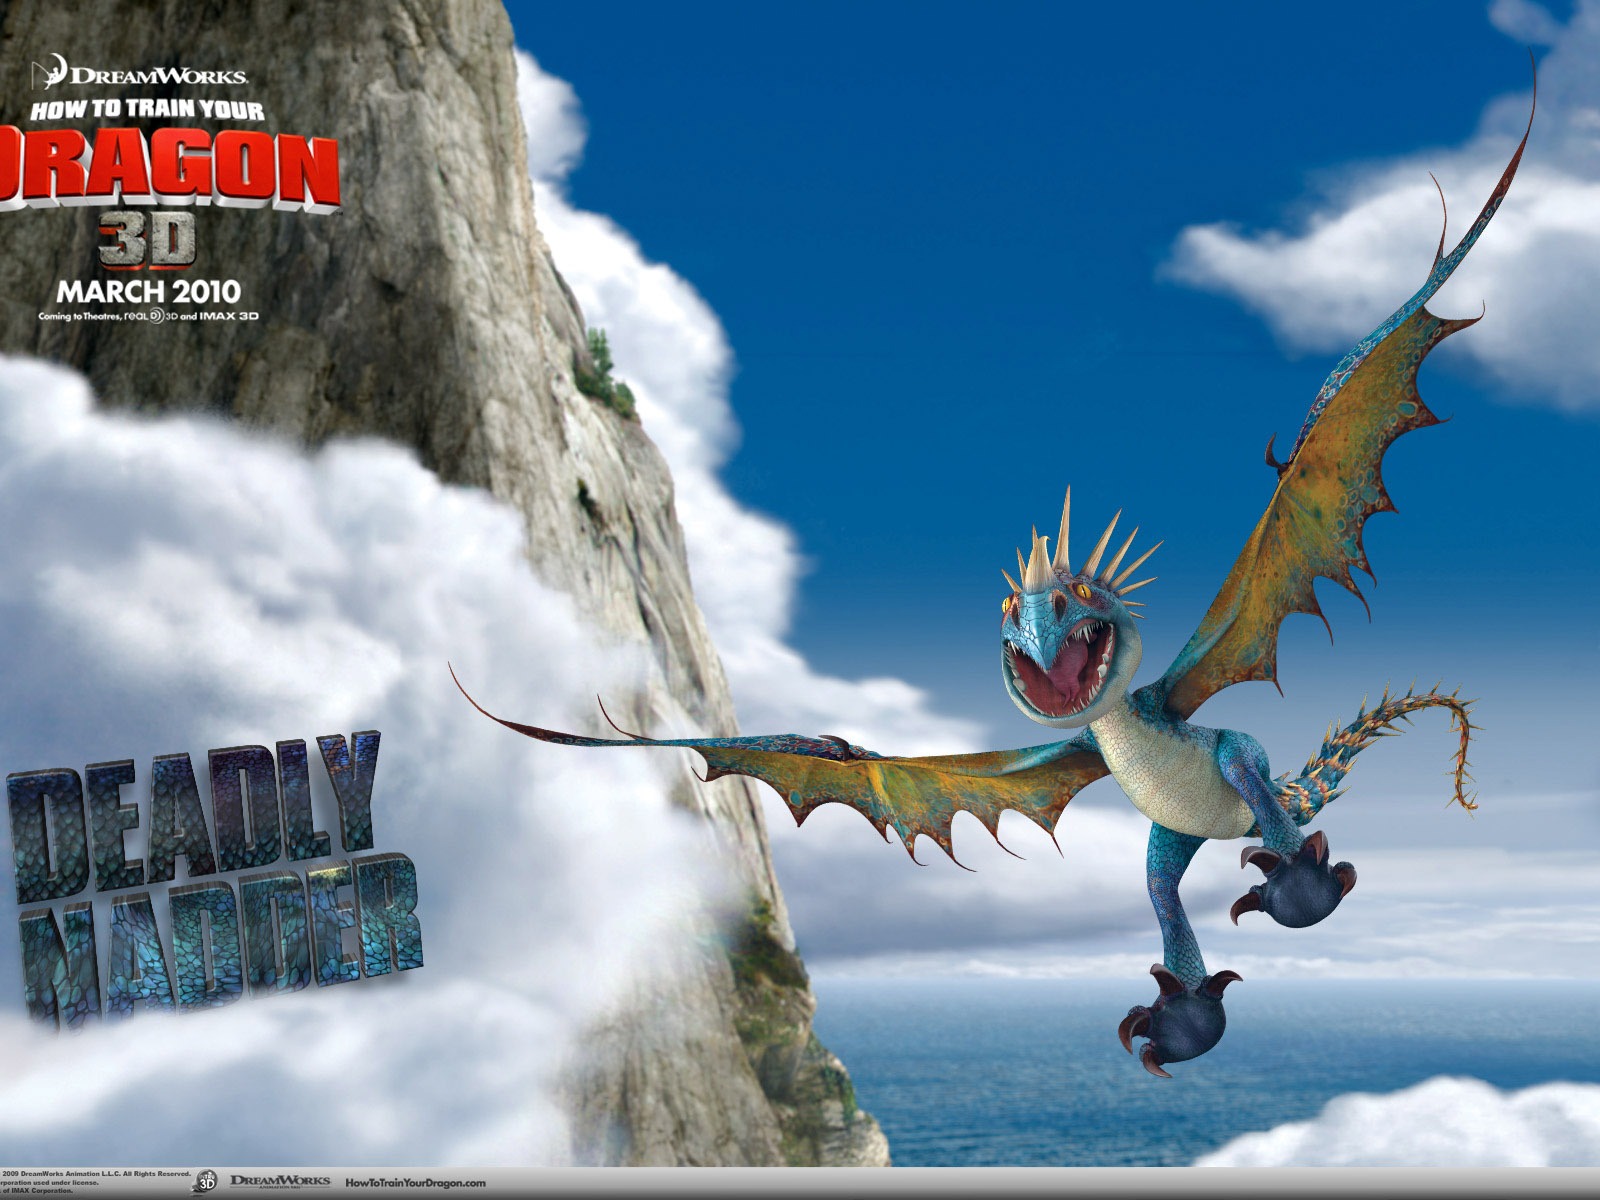 How to Train Your Dragon HD wallpaper #8 - 1600x1200